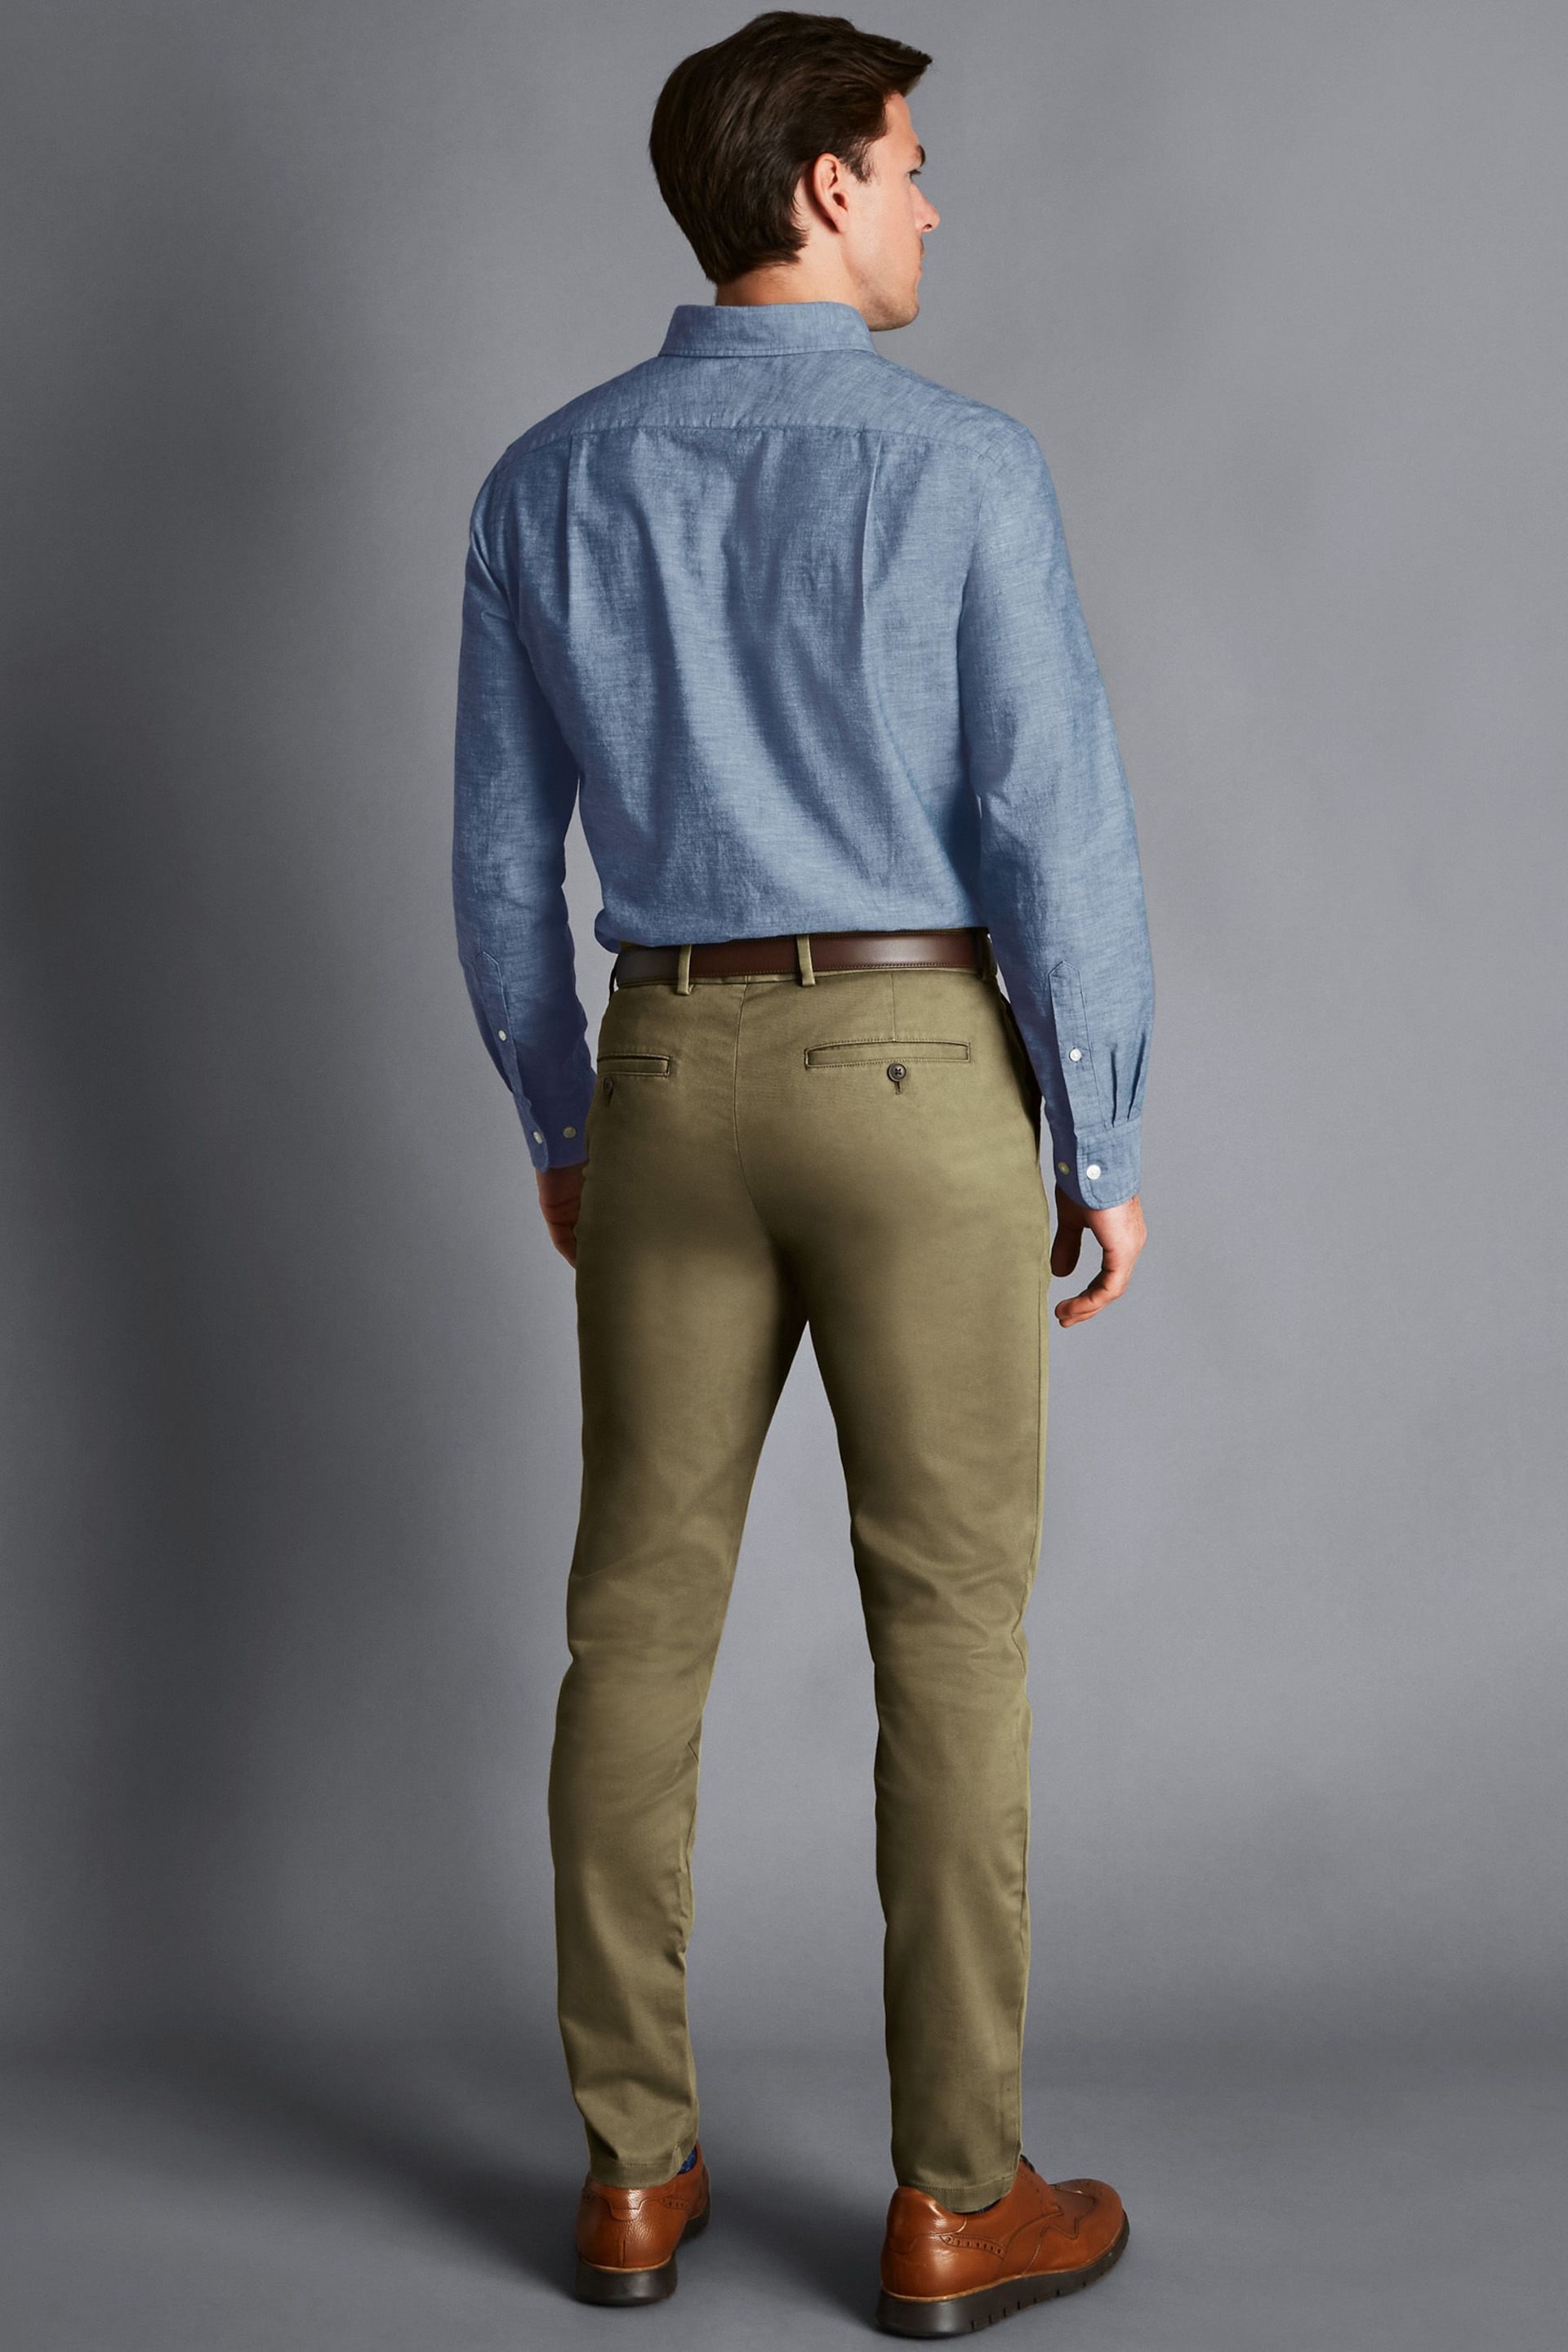 Charles Tyrwhitt Green Slim Fit Ultimate Non-Iron Chinos - Image 4 of 4